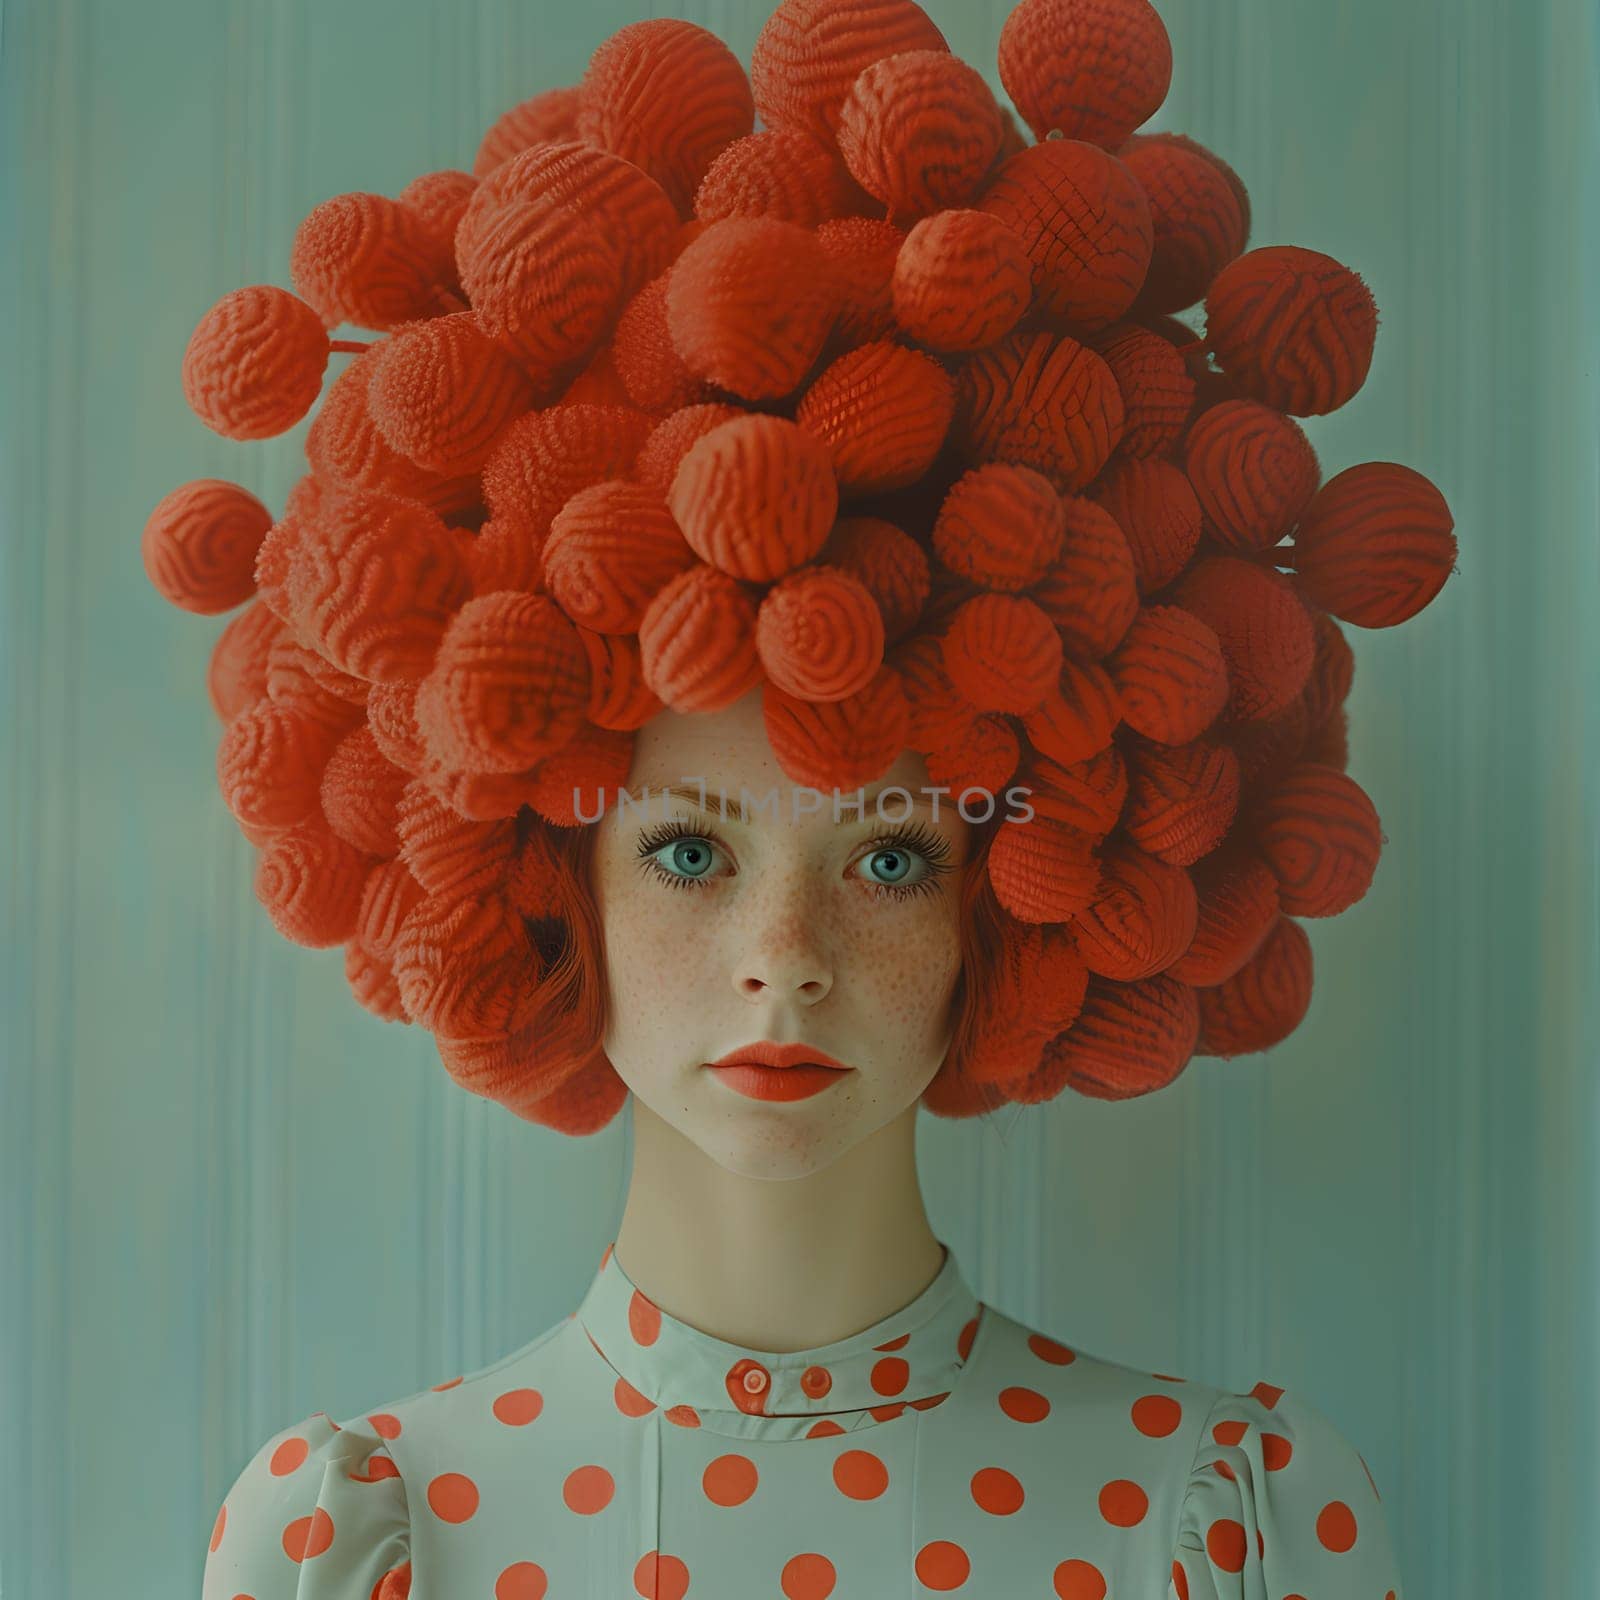 A lady is donning a polka dot dress adorned with an orange flower in her hair. She wears a voluminous red wig styled with artful petals, resembling a vibrant headgear